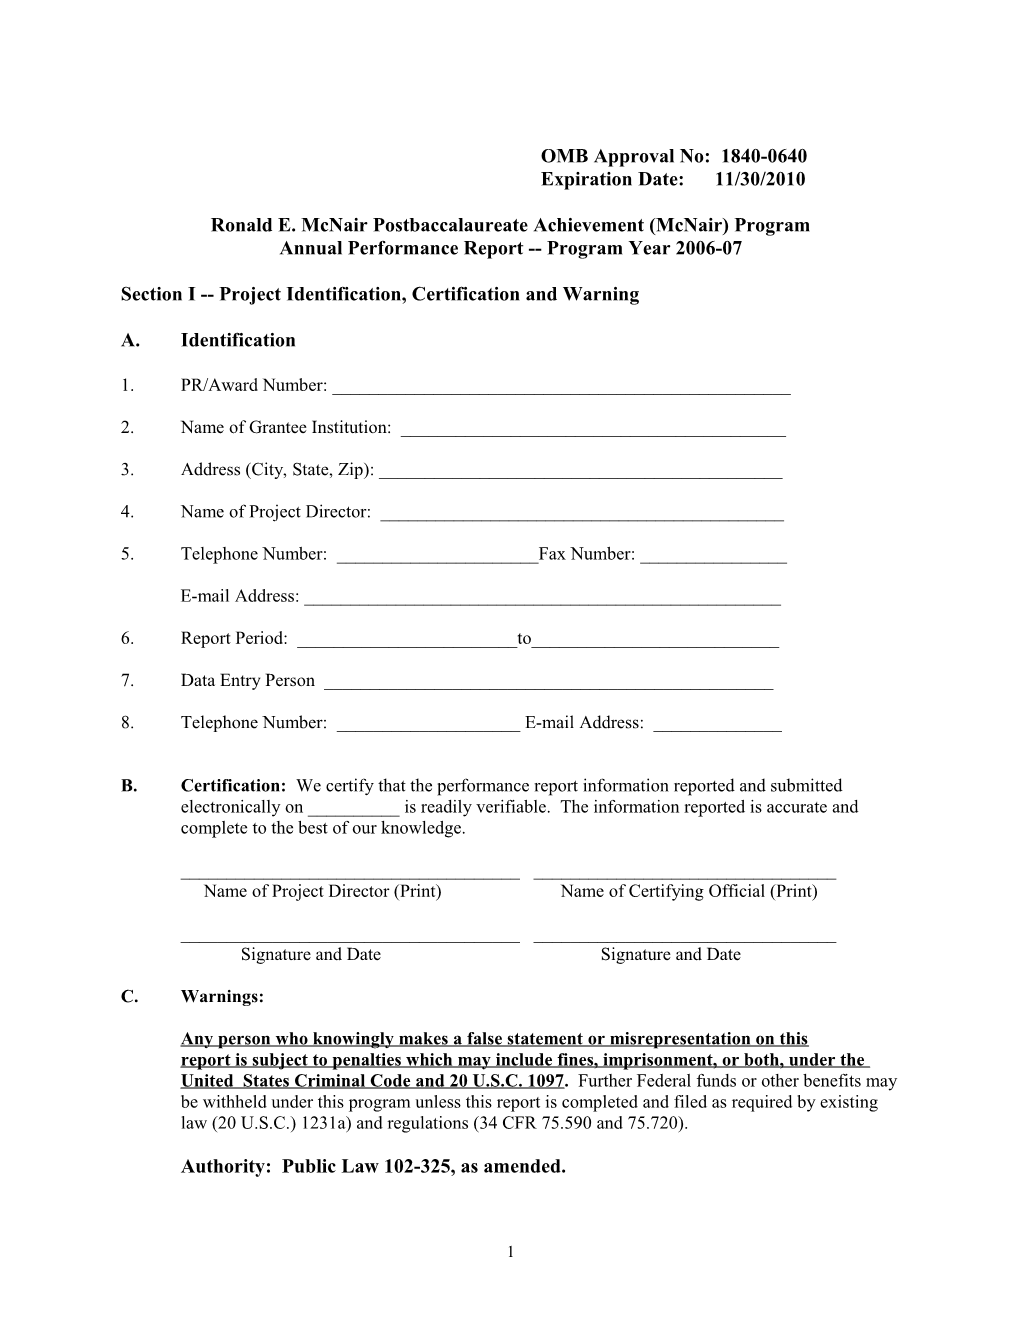 2006-07 Annual Performance Report Form for the Ronald Mcnair Program (MS Word)